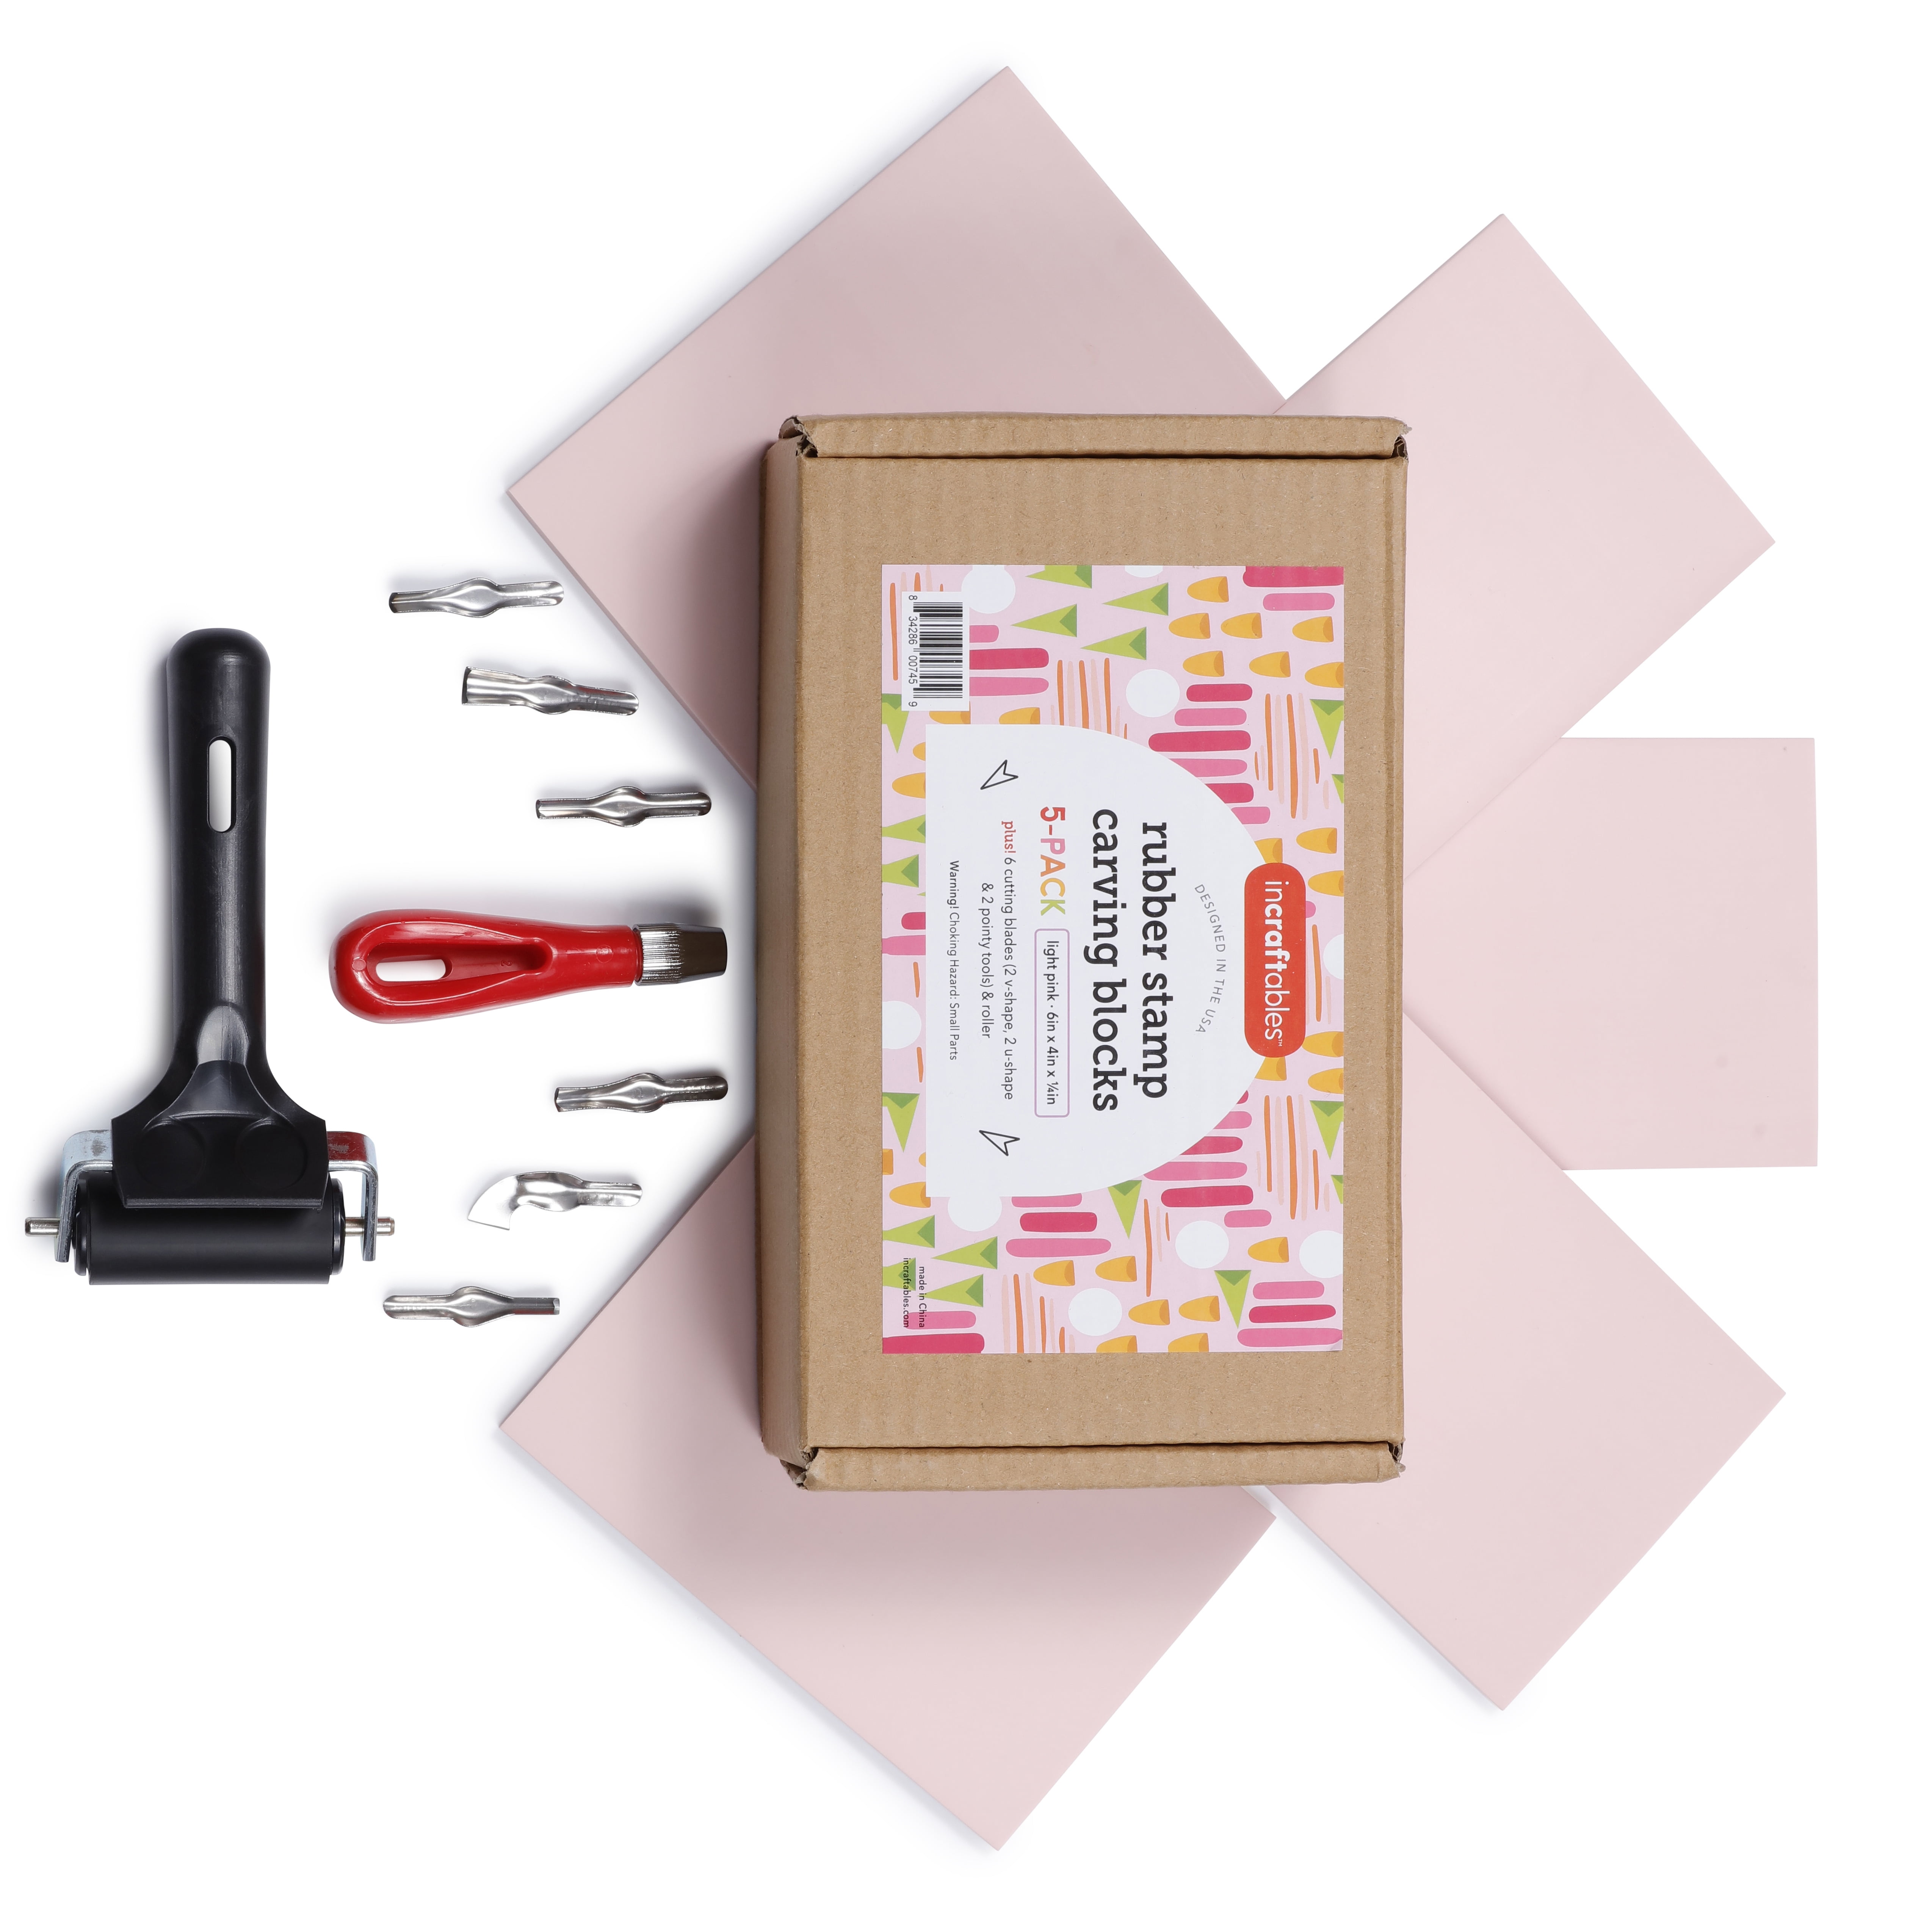 Block Printing Stamp Making Kit || Includes 2 Lino Cutters, Lino Handle, 5  Wood Mounted Blocks, Ink Pad and Leaflet Including Stamp Design || Used in